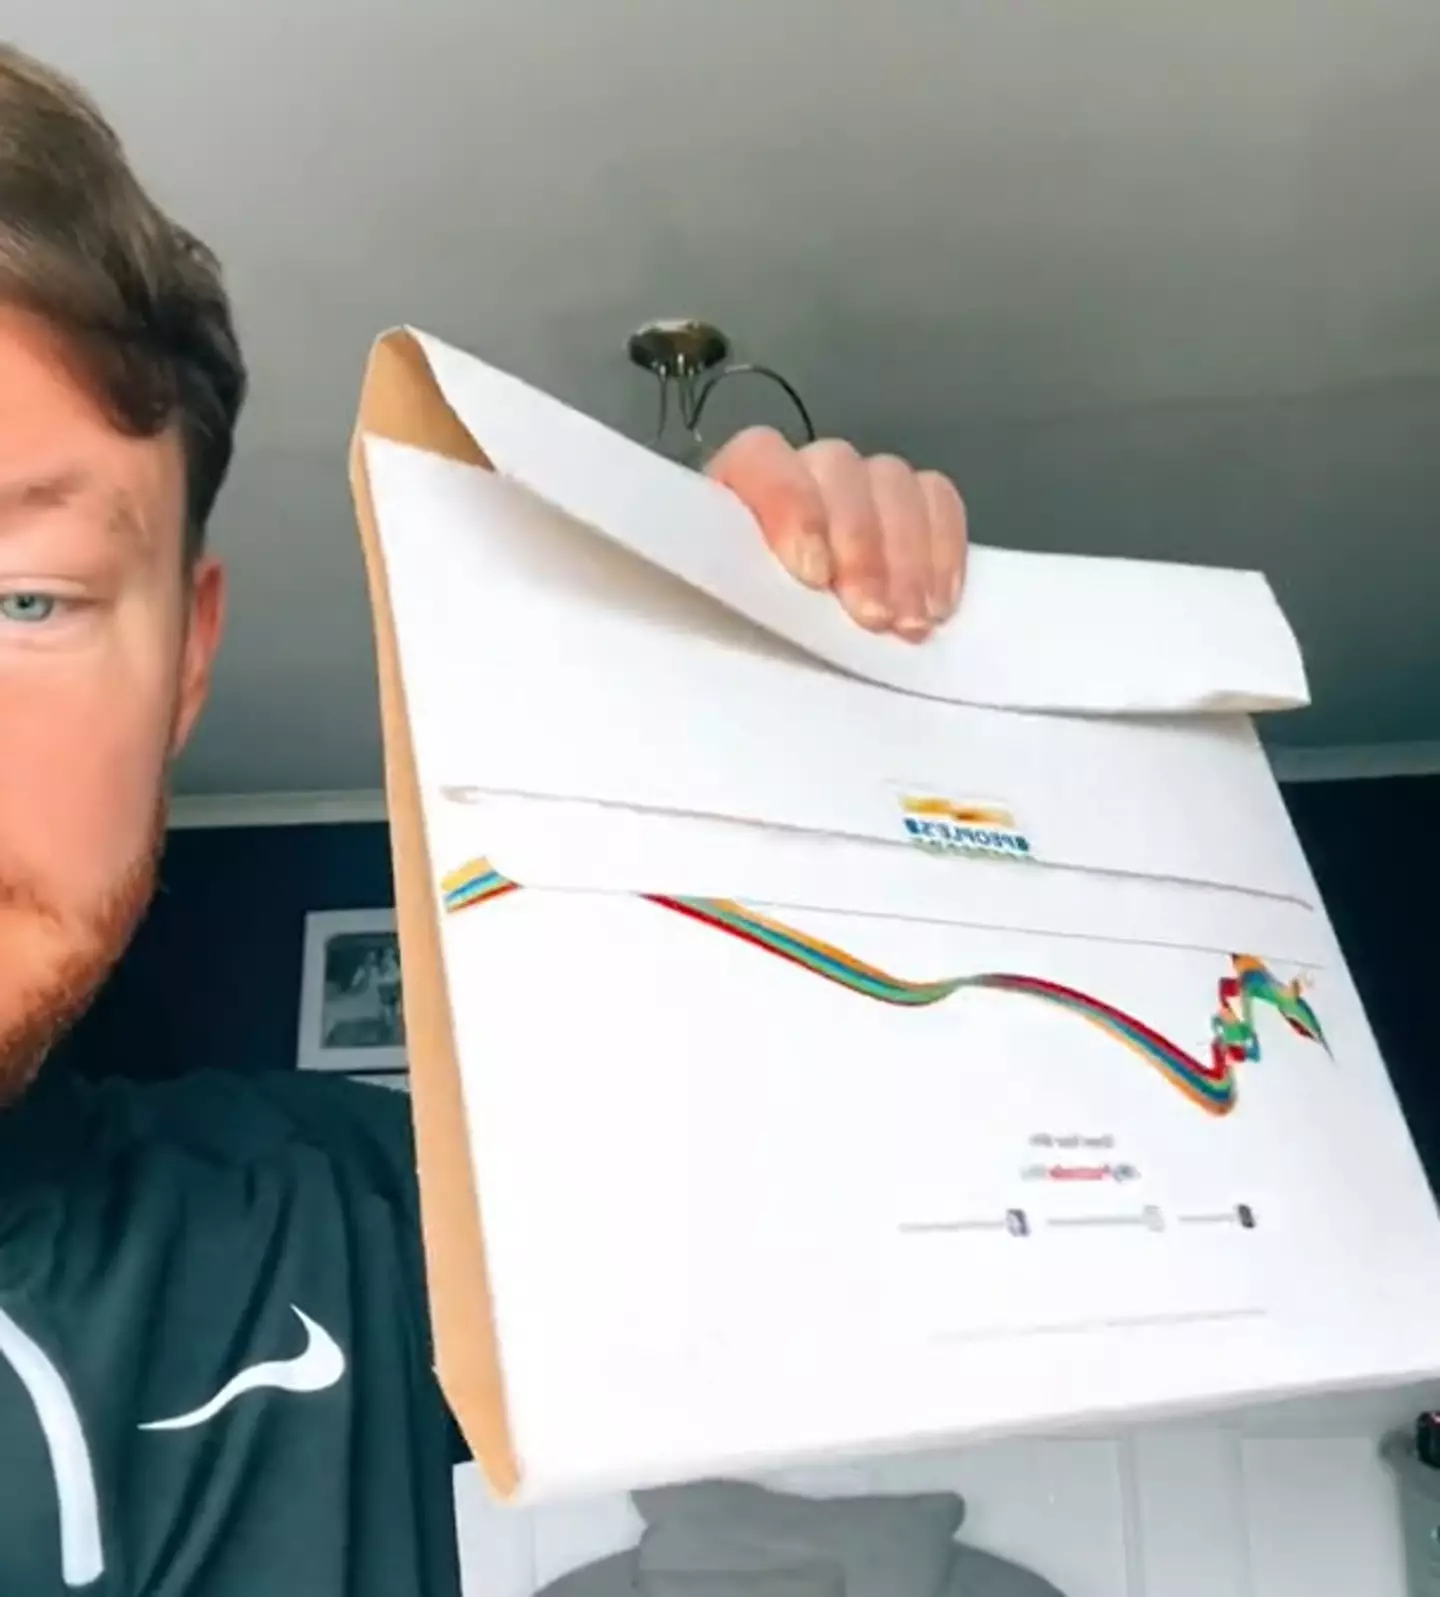 The Bolton man got a package from the Postcode Lottery and hoped it might be a cheque. (TikTok/@chriscork89)